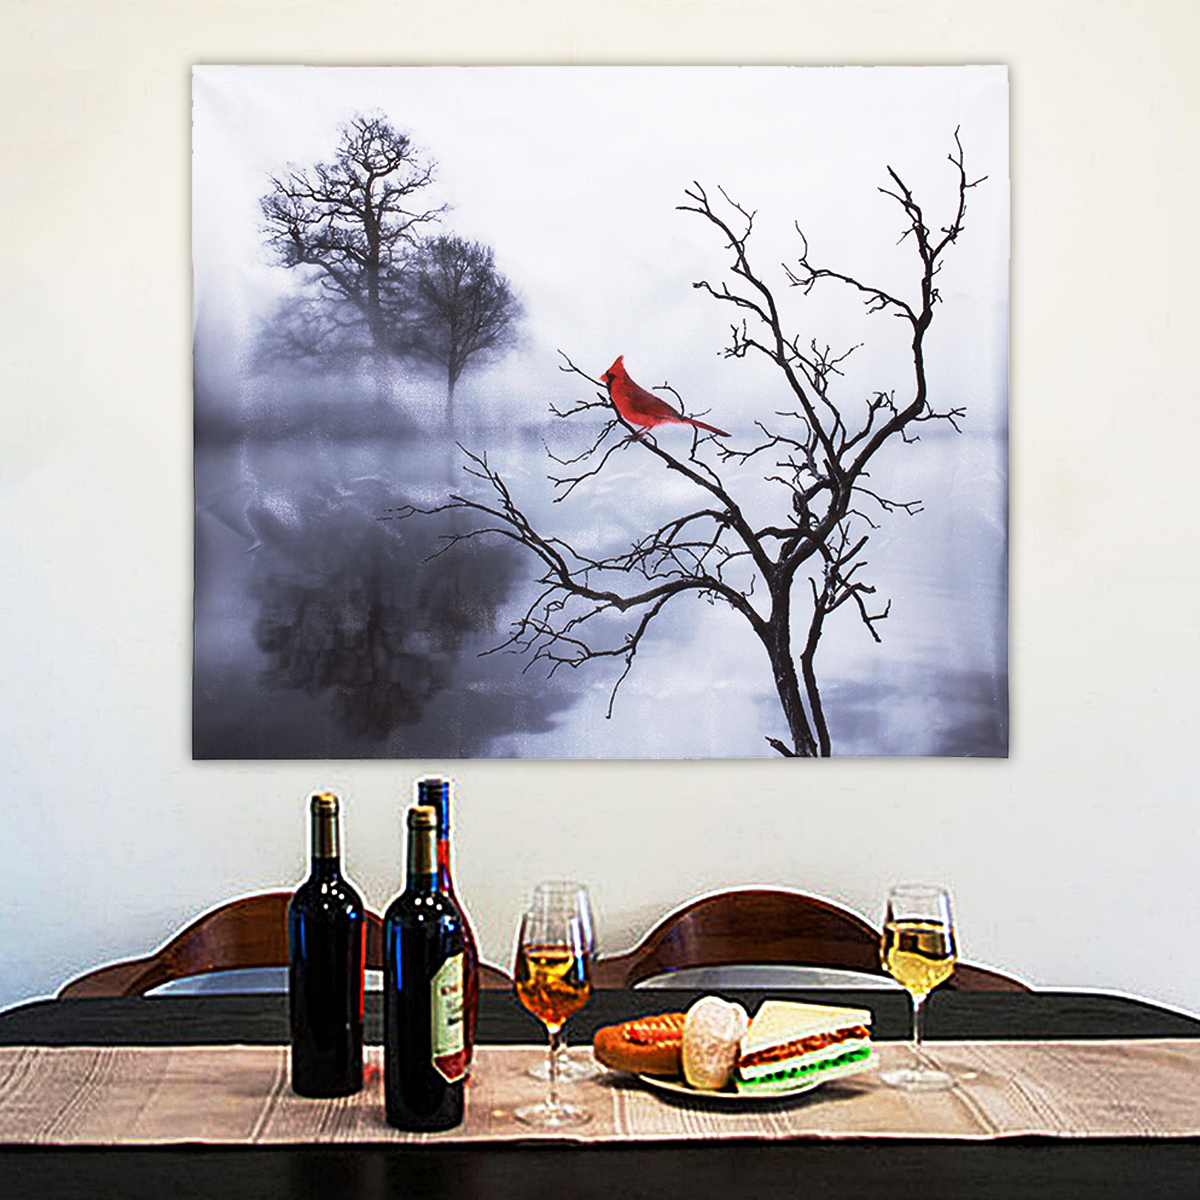 Modern-Red-Bird-Tree-Canvas-Oil-Printed-Paintings-Home-Wall-Art-Decor-Unframed-Decorations-1261540